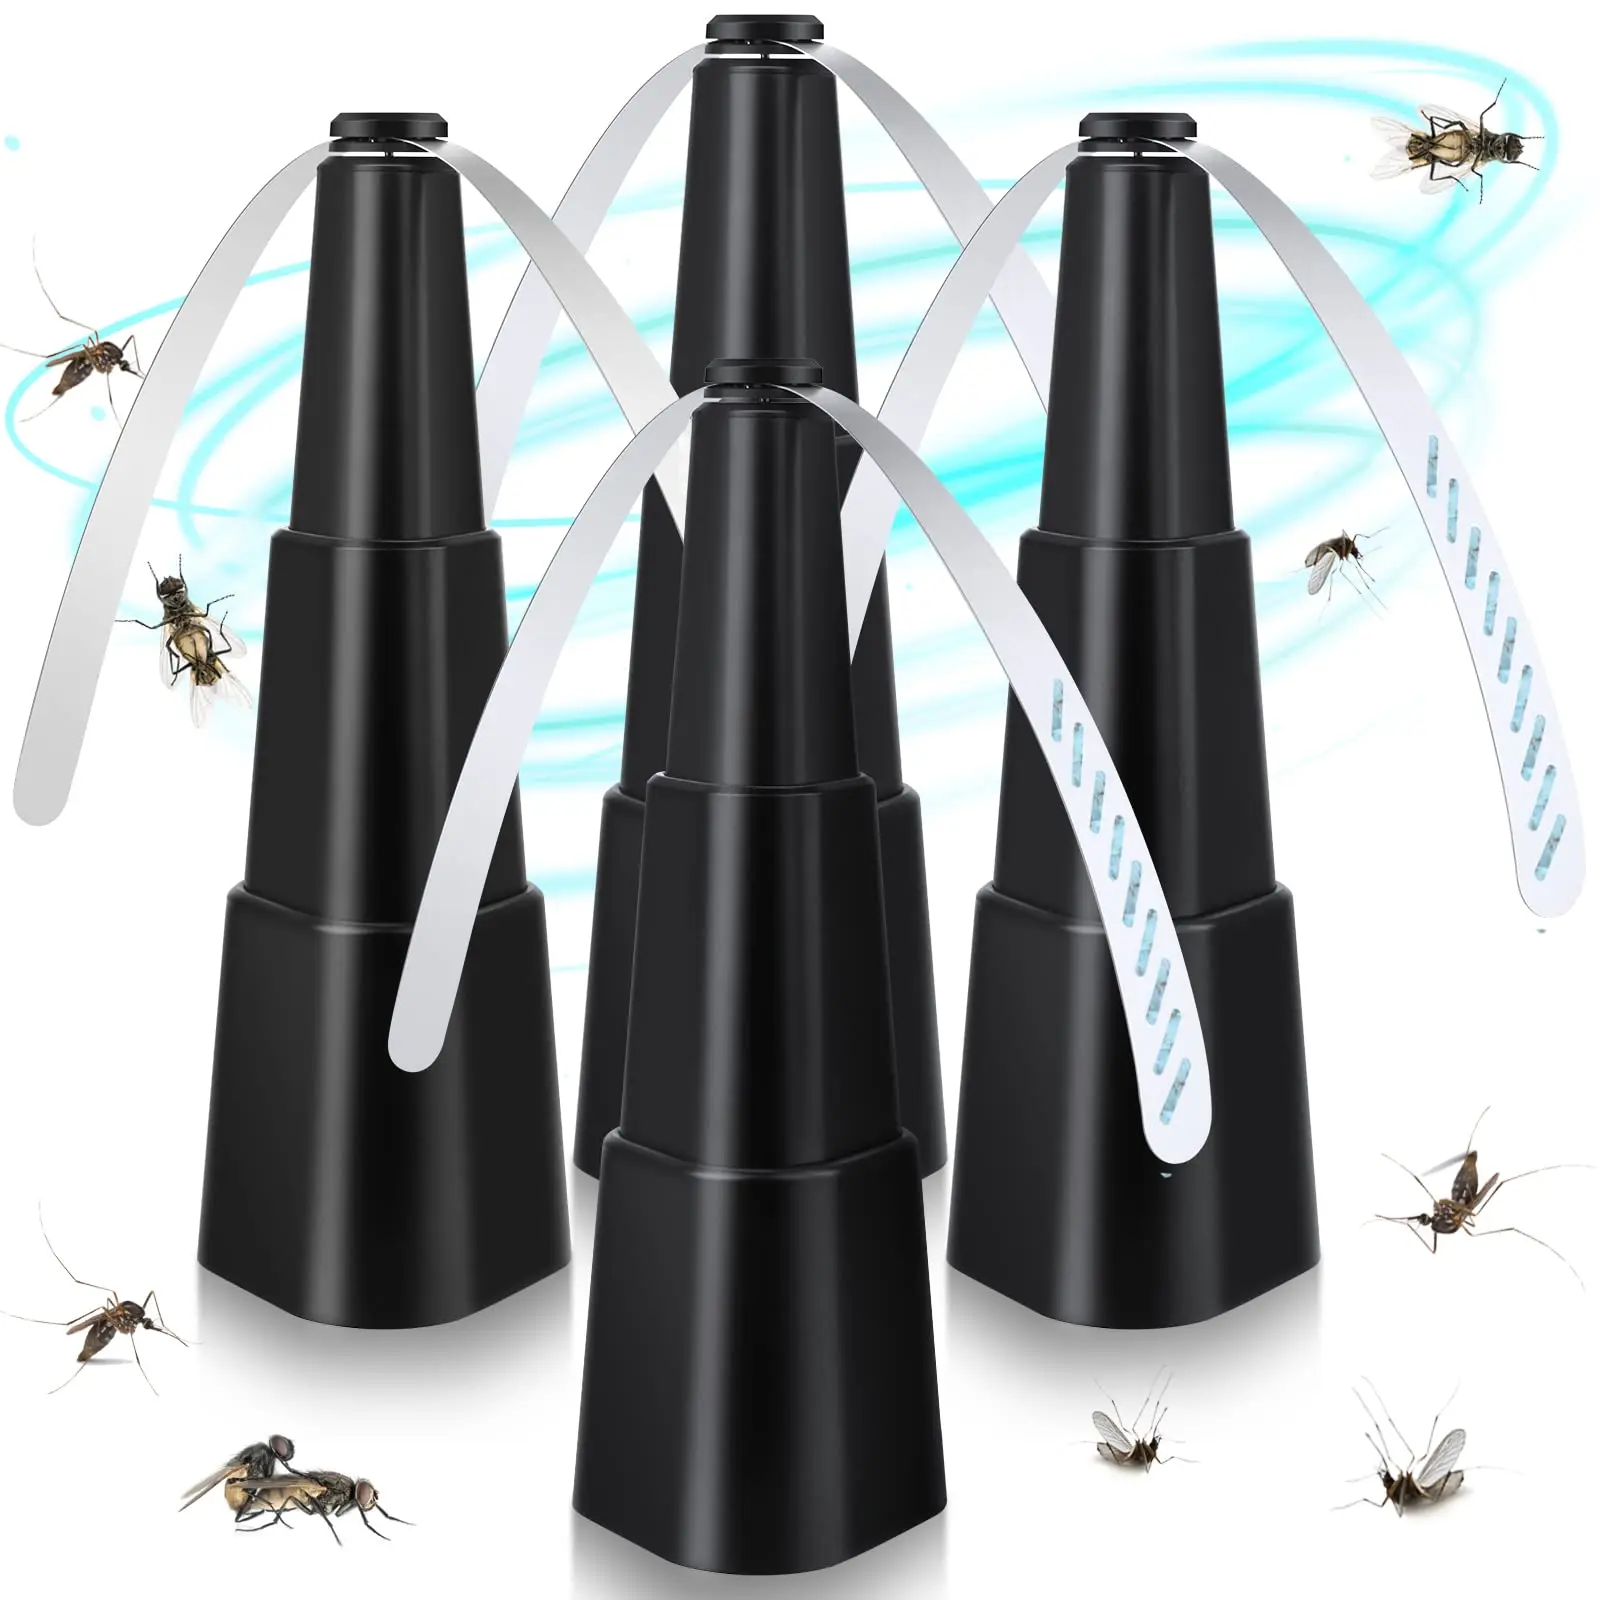 Fly Fans for Tables Fly Repellent Fan Indoor Outdoor with Holographic Blades Keep Flies Away Bug Repellent Outdoor